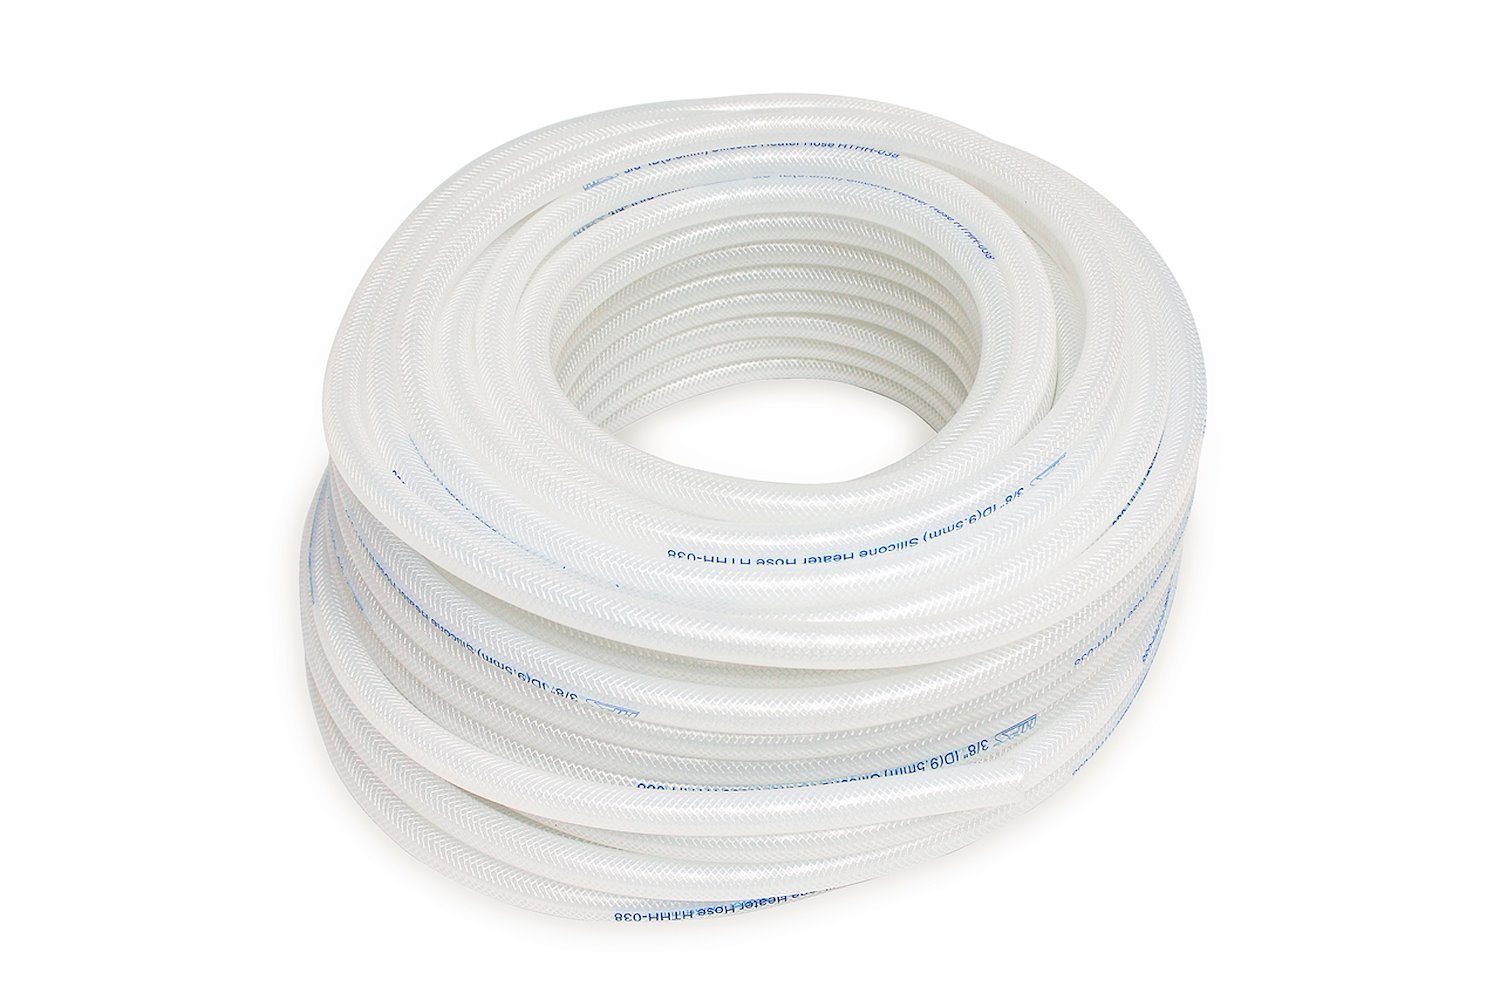 HTHH-100-CLEARx50 Silicone Heater Hose Tubing, High-Temp 1-Ply Reinforced, 1 in. ID, 50 ft. Roll, Clear